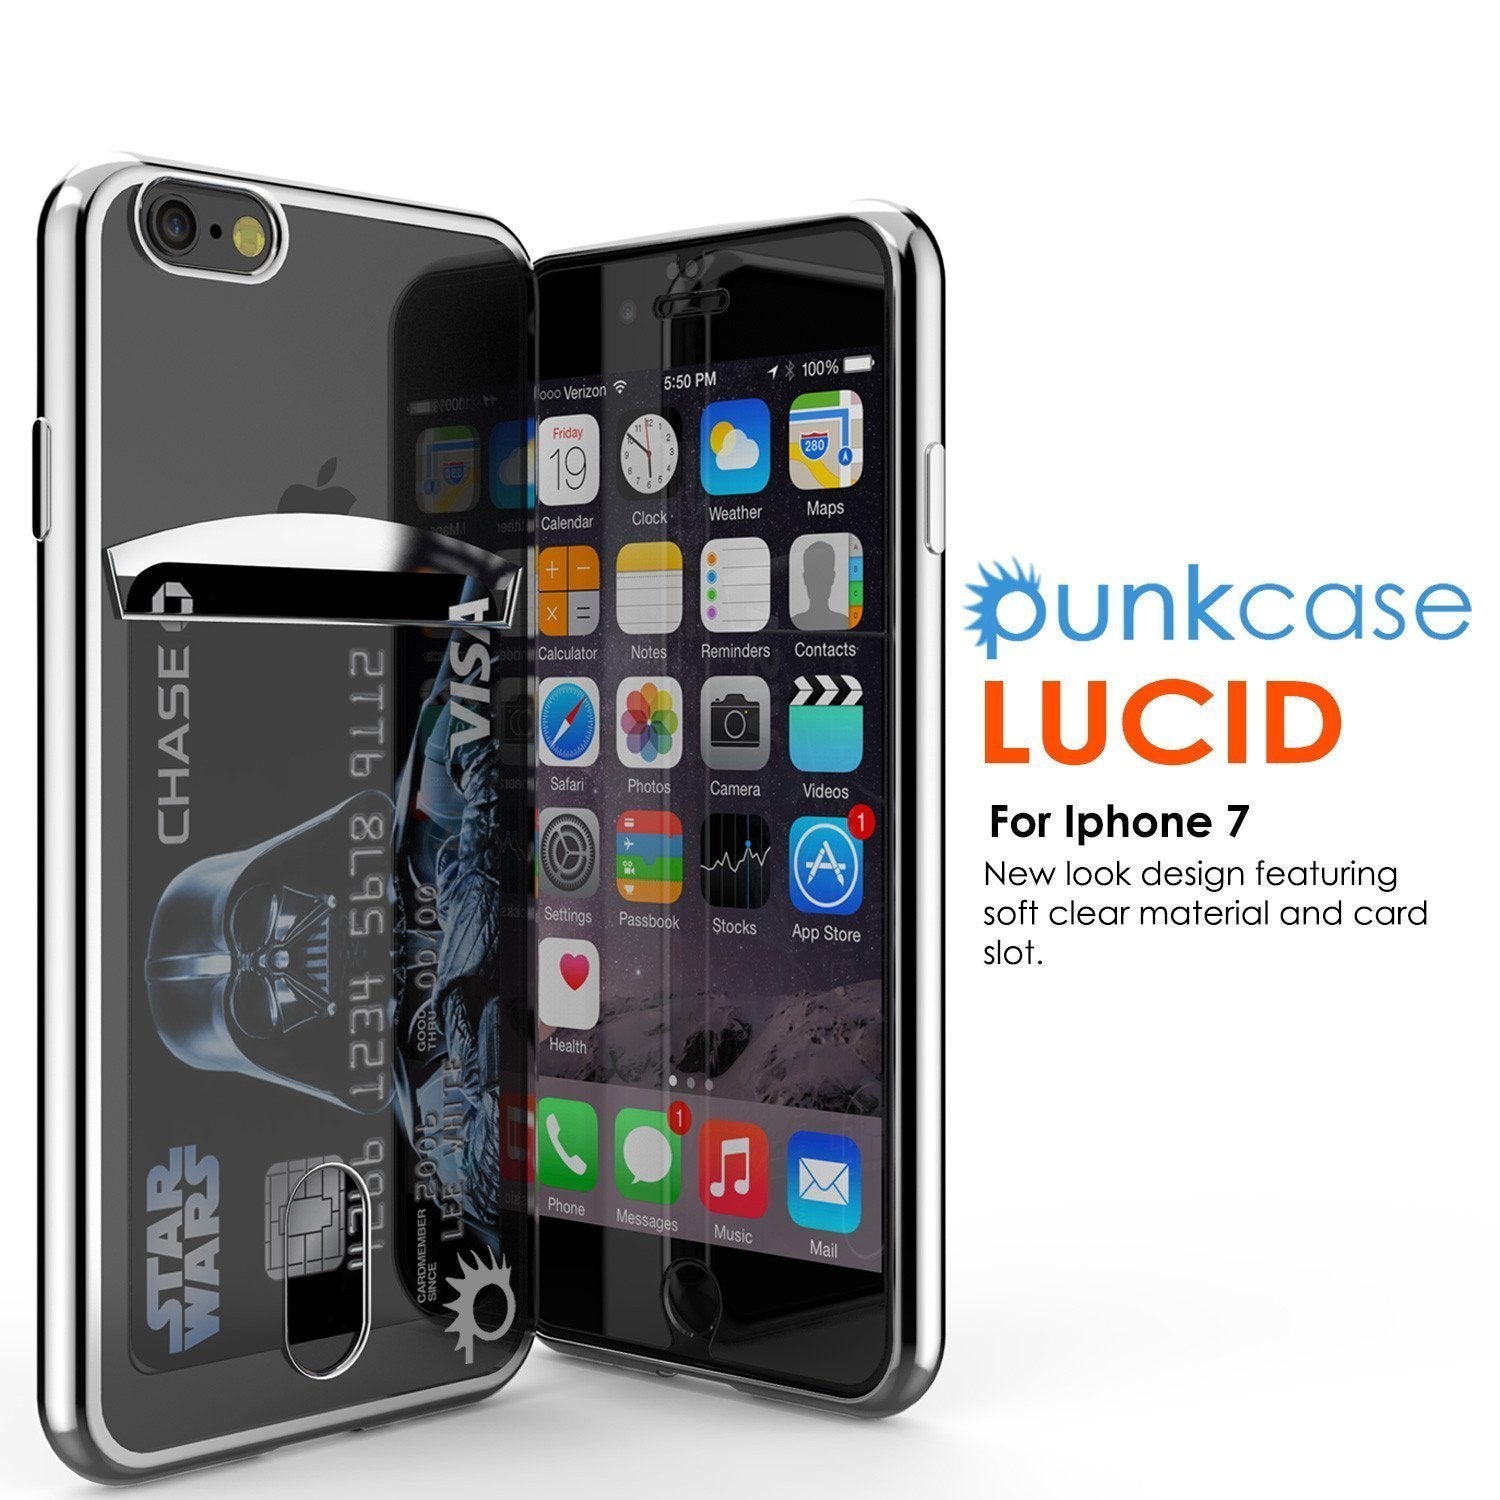 iPhone SE (4.7") Case, PUNKCASE® LUCID Silver Series | Card Slot | SHIELD Screen Protector | Ultra fit